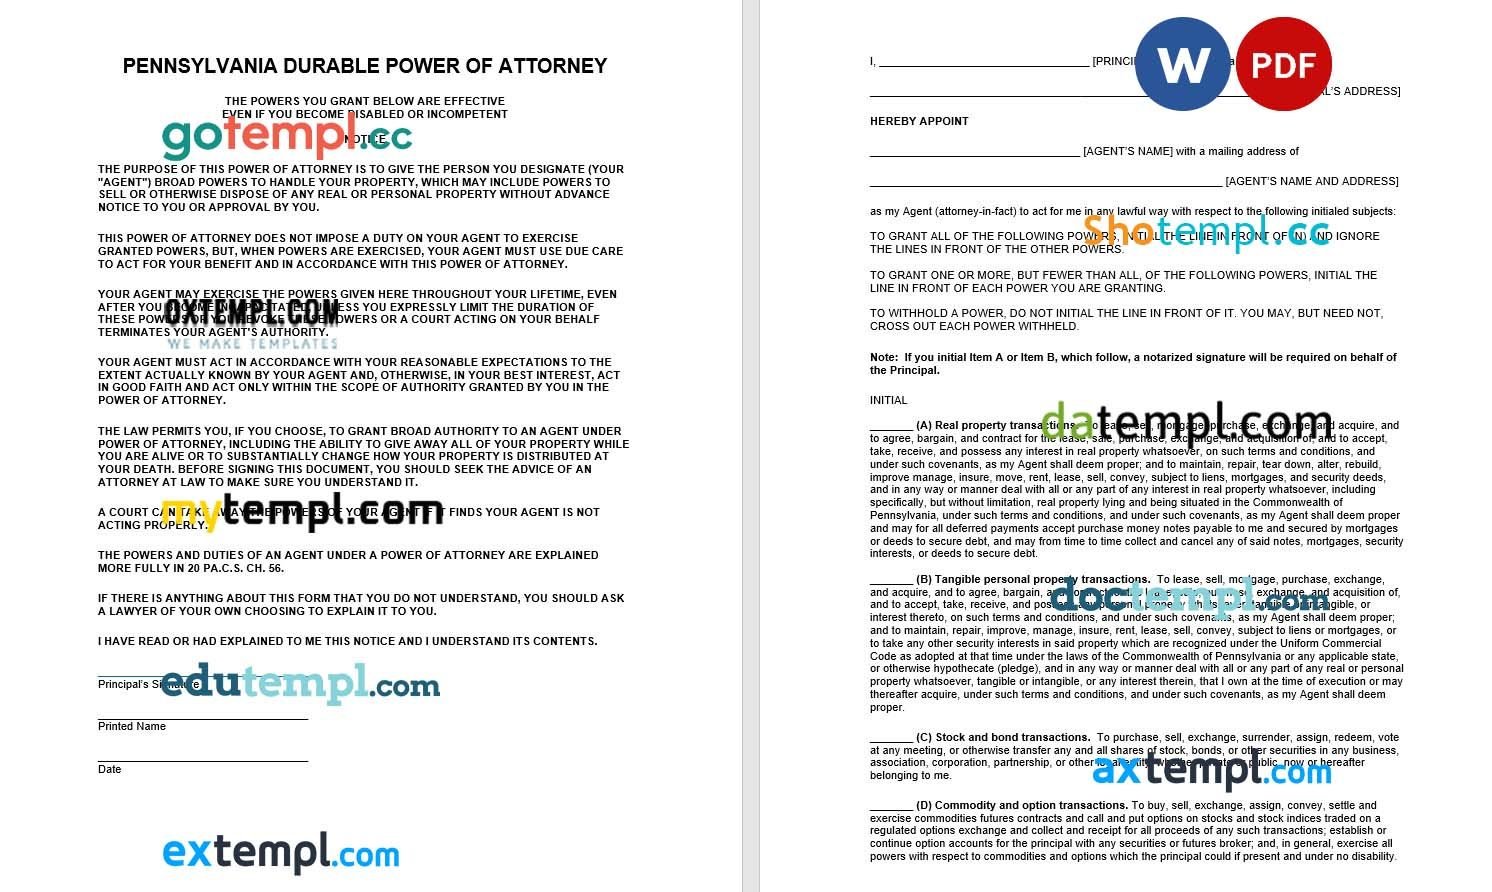 Wyoming Motor Vehicle Power of Attorney example, fully editable